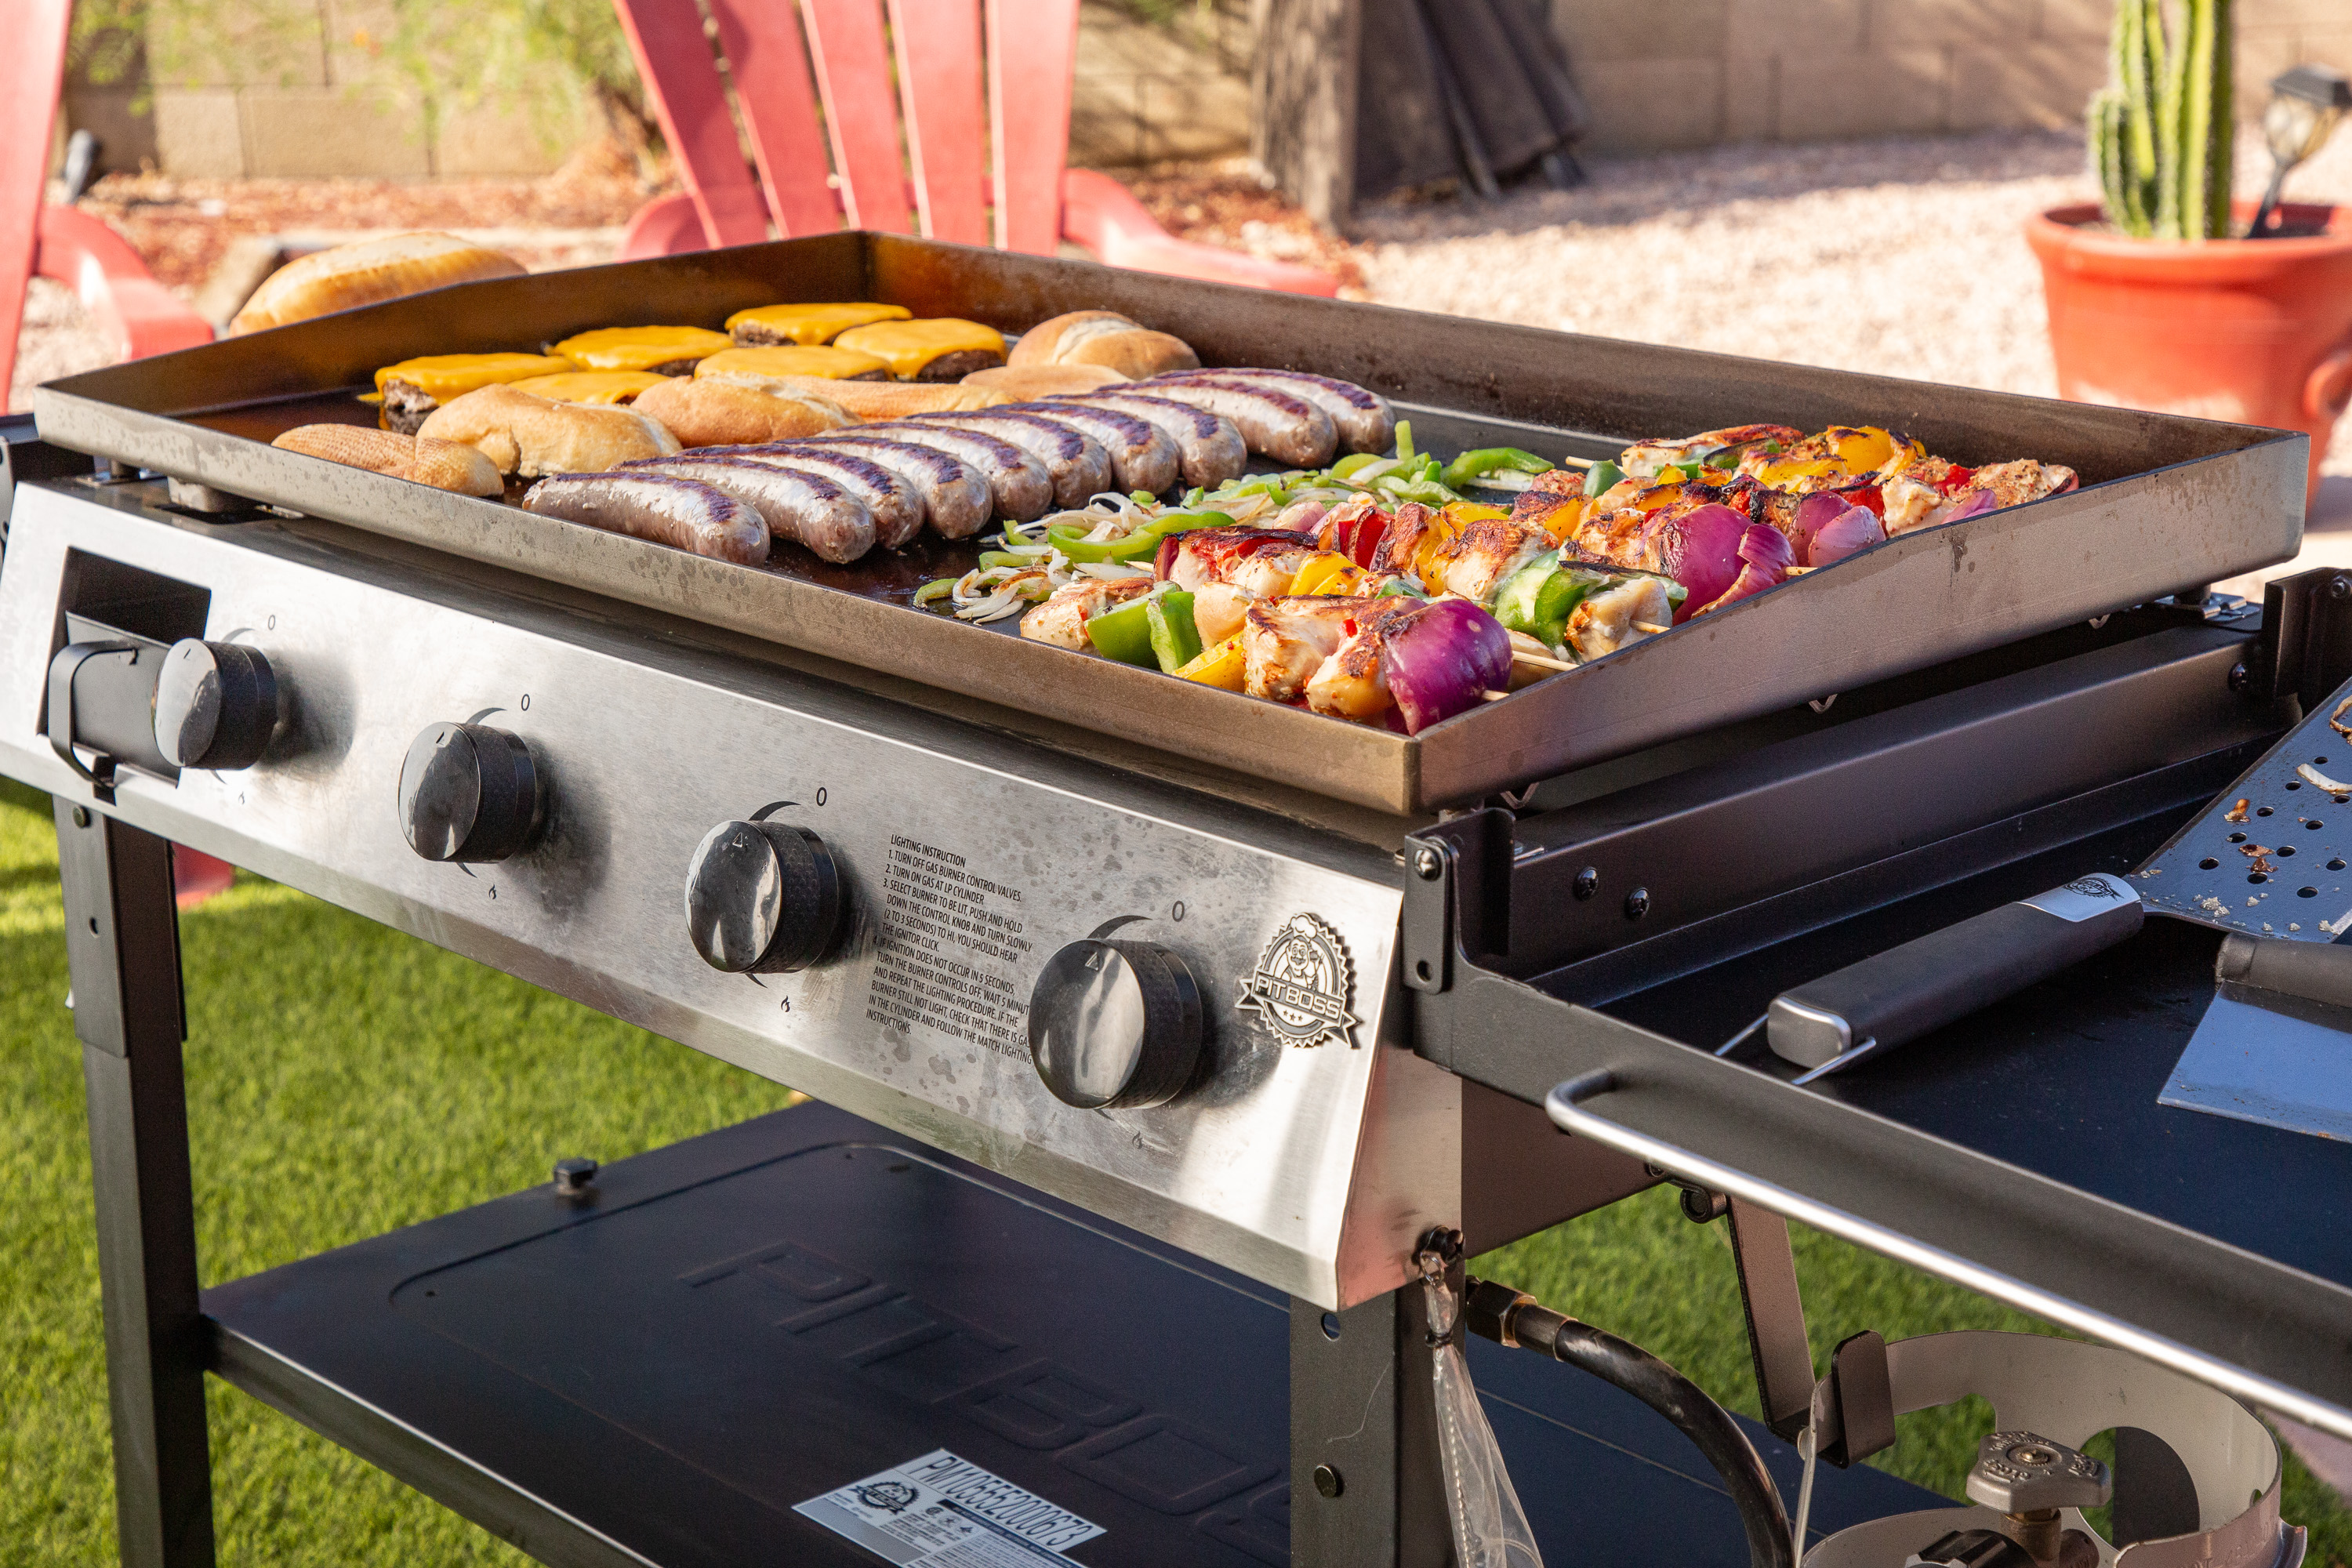 Pit Boss Deluxe 4-Burner Griddle w/ 2 Folding Side Shelves and Cover - PB757GD - image 5 of 6